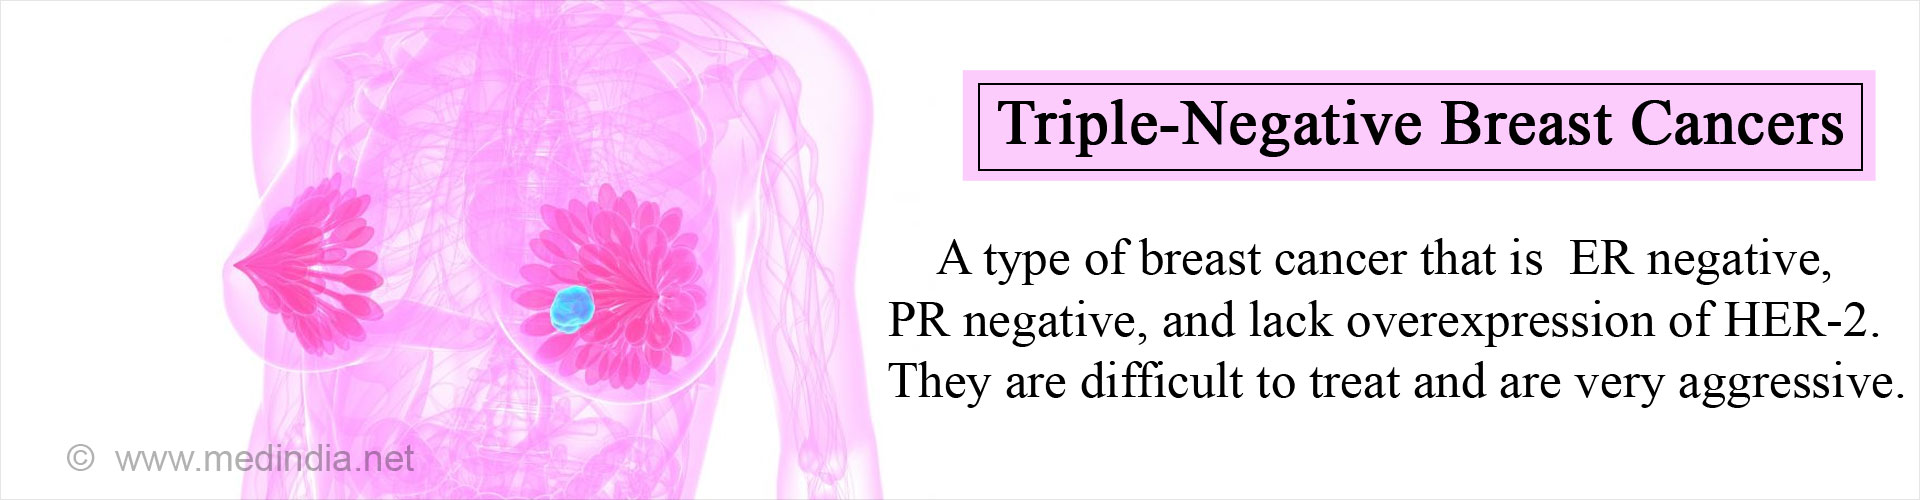 Triple-Negative Breast Cancer - A type of breast cancer that is ER negative, PR negative, and lack overexpression of HER-2. They are difficult to treat and are very aggressive.